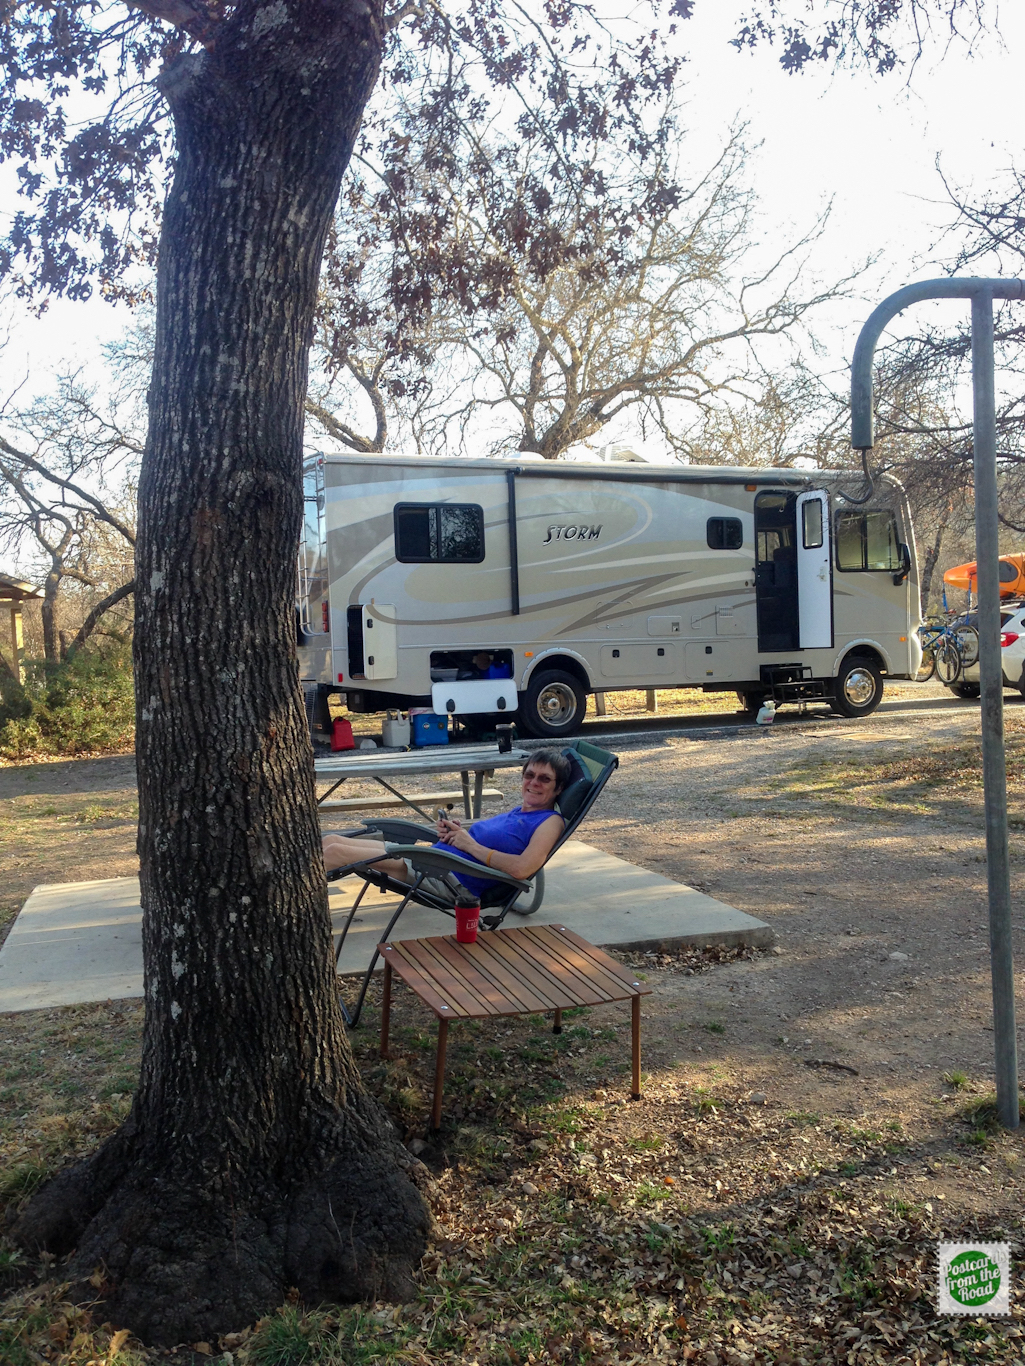 South Llano River State Park, TX – February 19